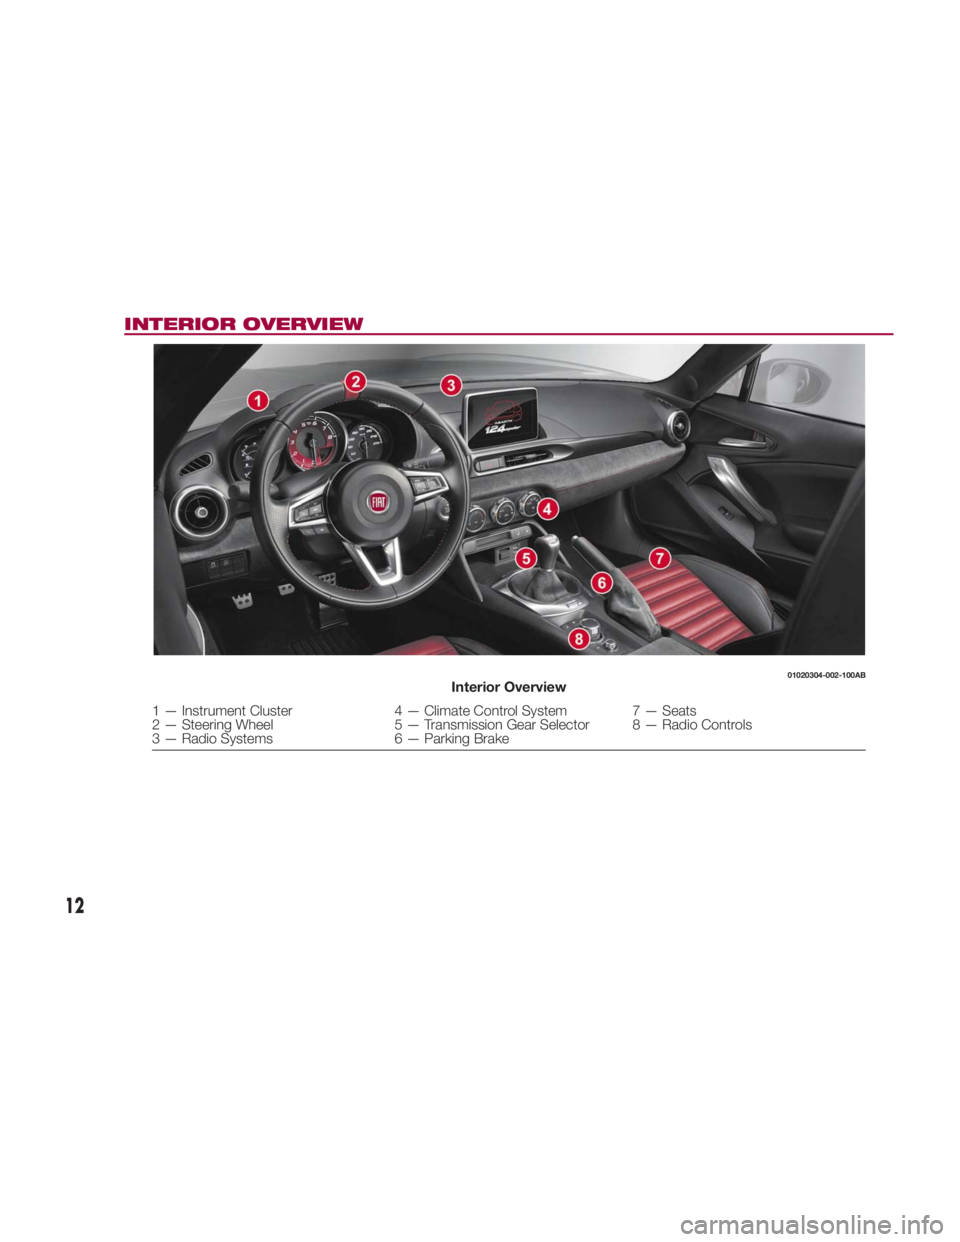 FIAT SPIDER ABARTH 2017  Owners Manual INTERIOR OVERVIEW 01020304-002-100AB
Interior Overview
1 — Instrument Cluster 4 — Climate Control System 7 — Seats
2 — Steering Wheel 5 — Transmission Gear Selector 8 — Radio Controls
3 �